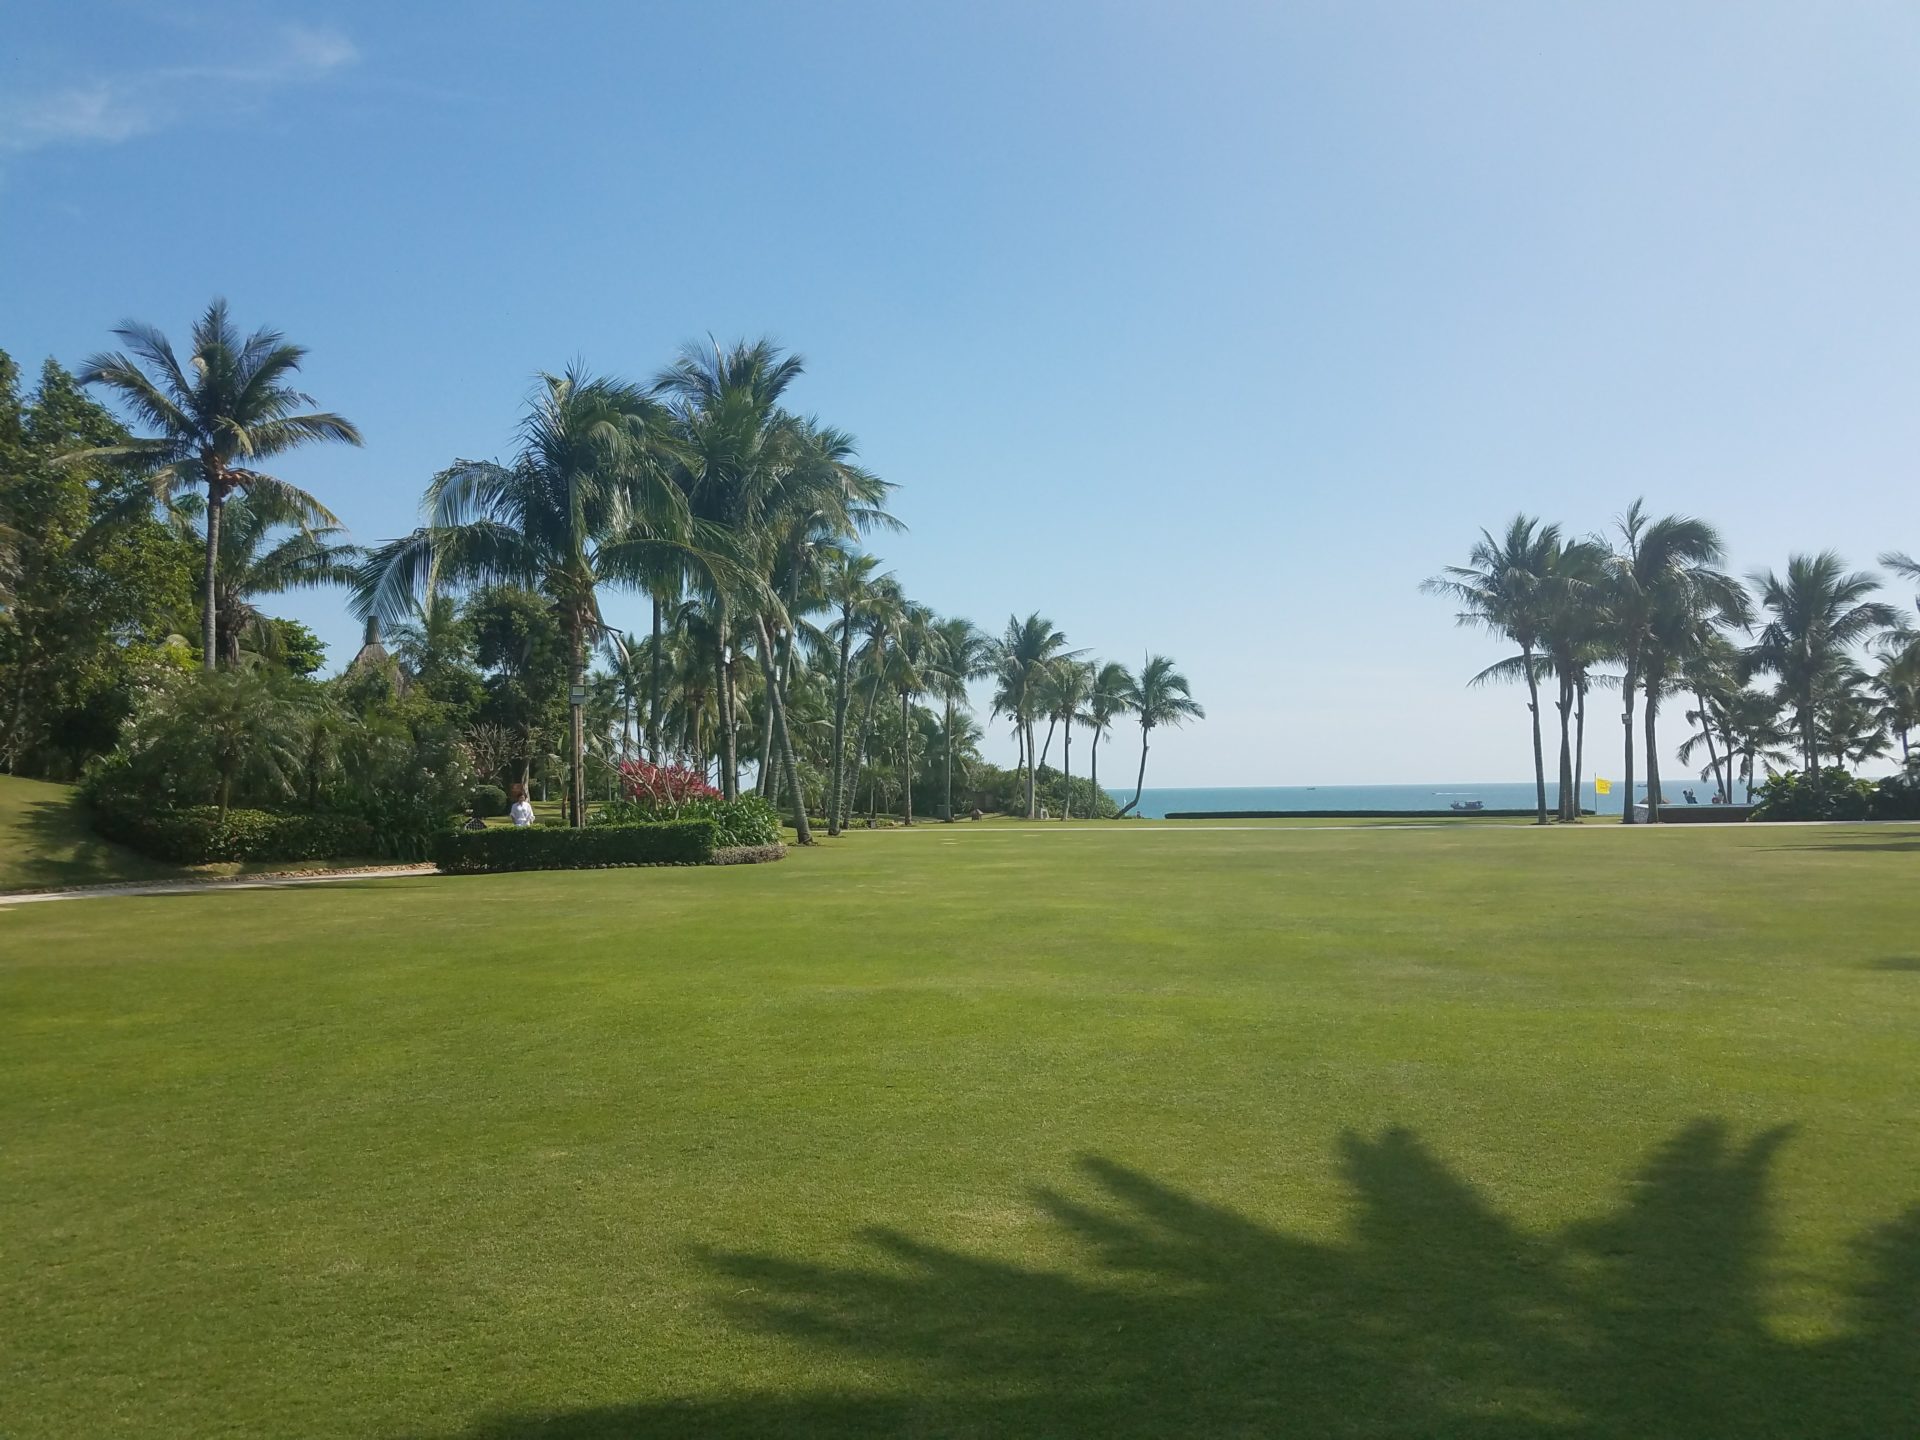 a large lawn with palm trees and a body of water